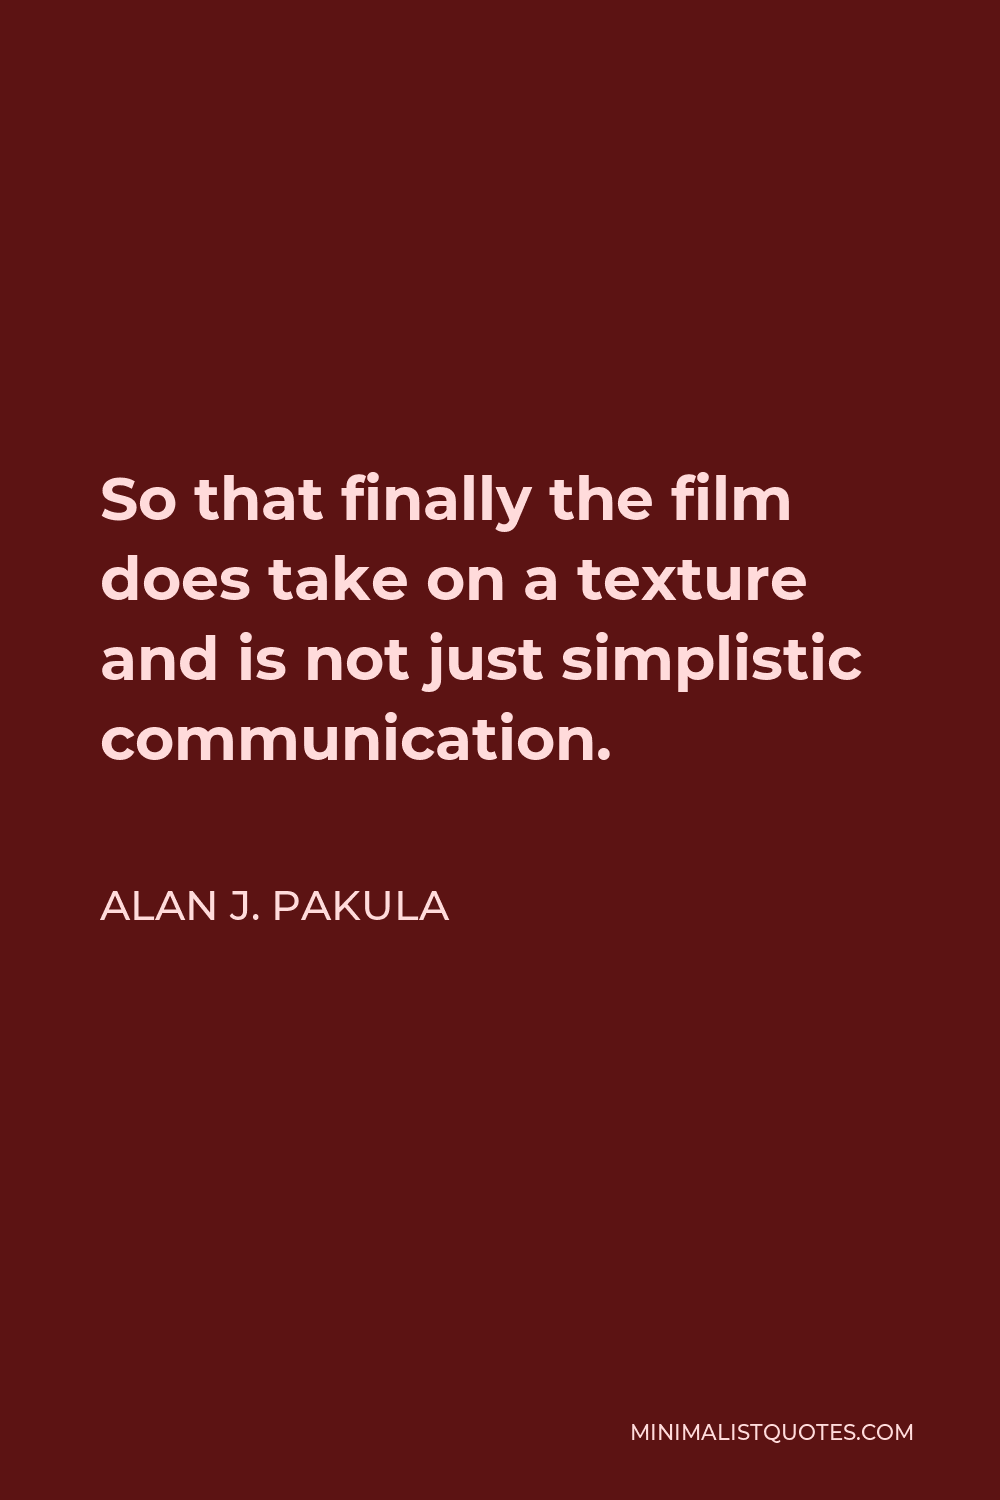 Alan J. Pakula Quote - So that finally the film does take on a texture and is not just simplistic communication.